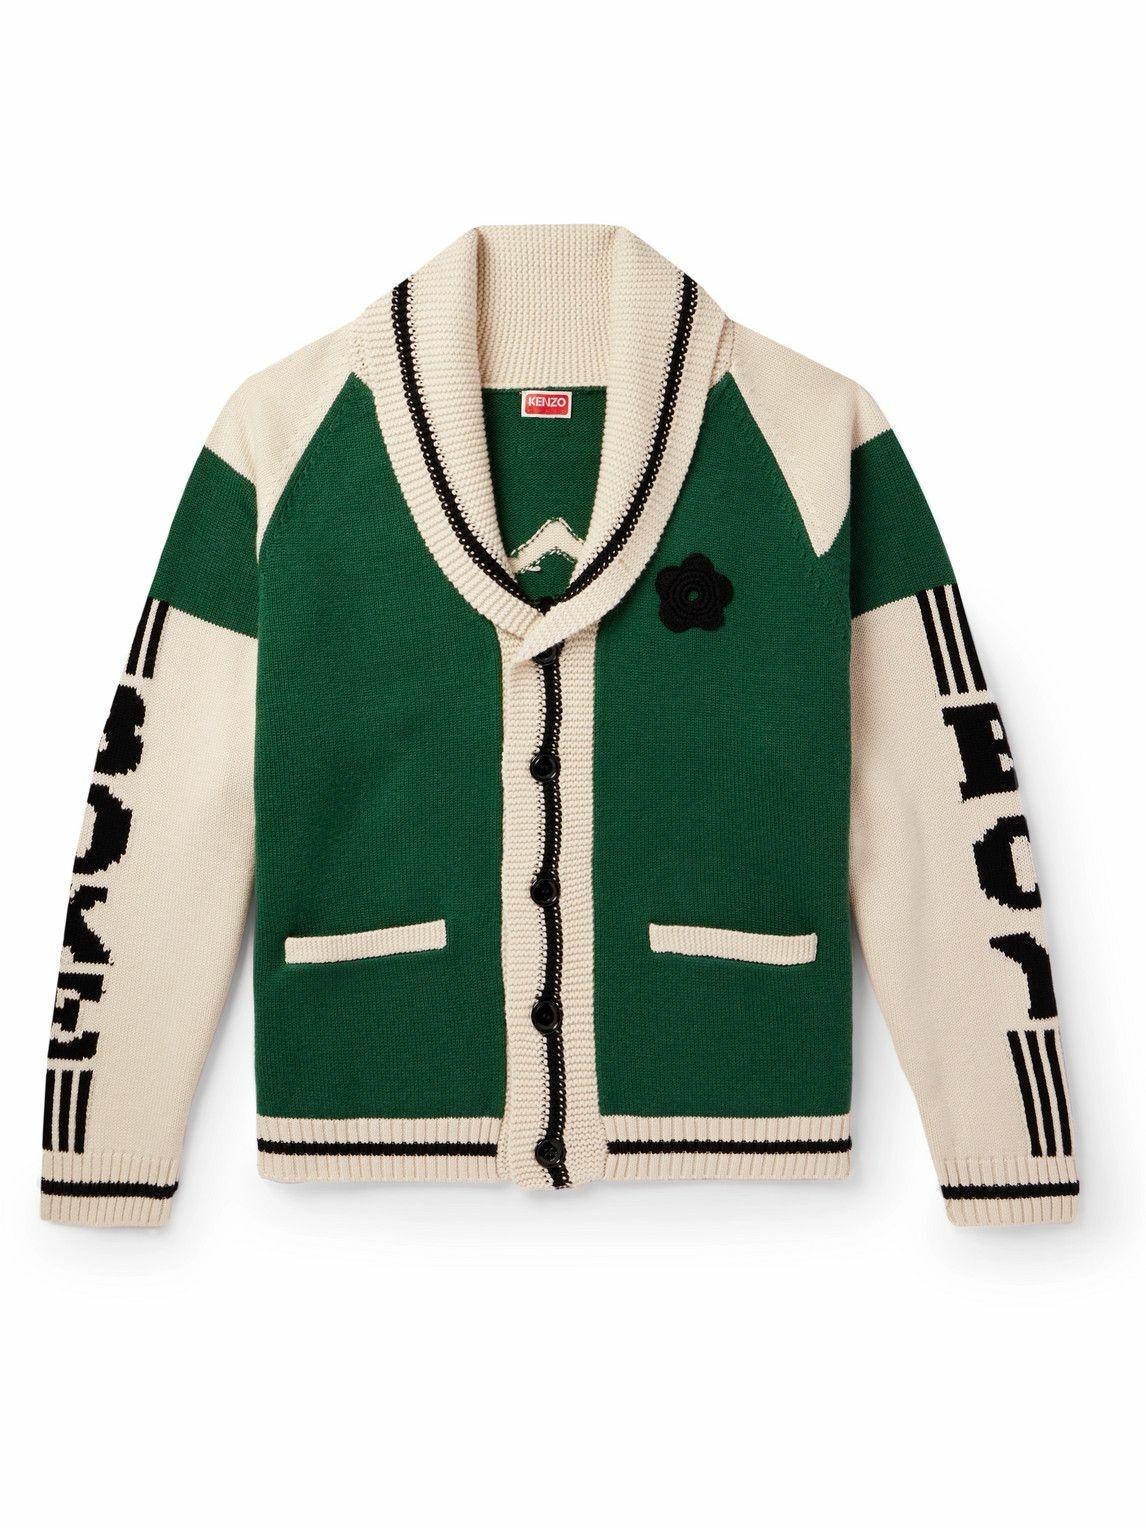 Photo: KENZO - Boke Boy Shawl-Collar Embroidered Wool and Cotton-Blend Cardigan - Green